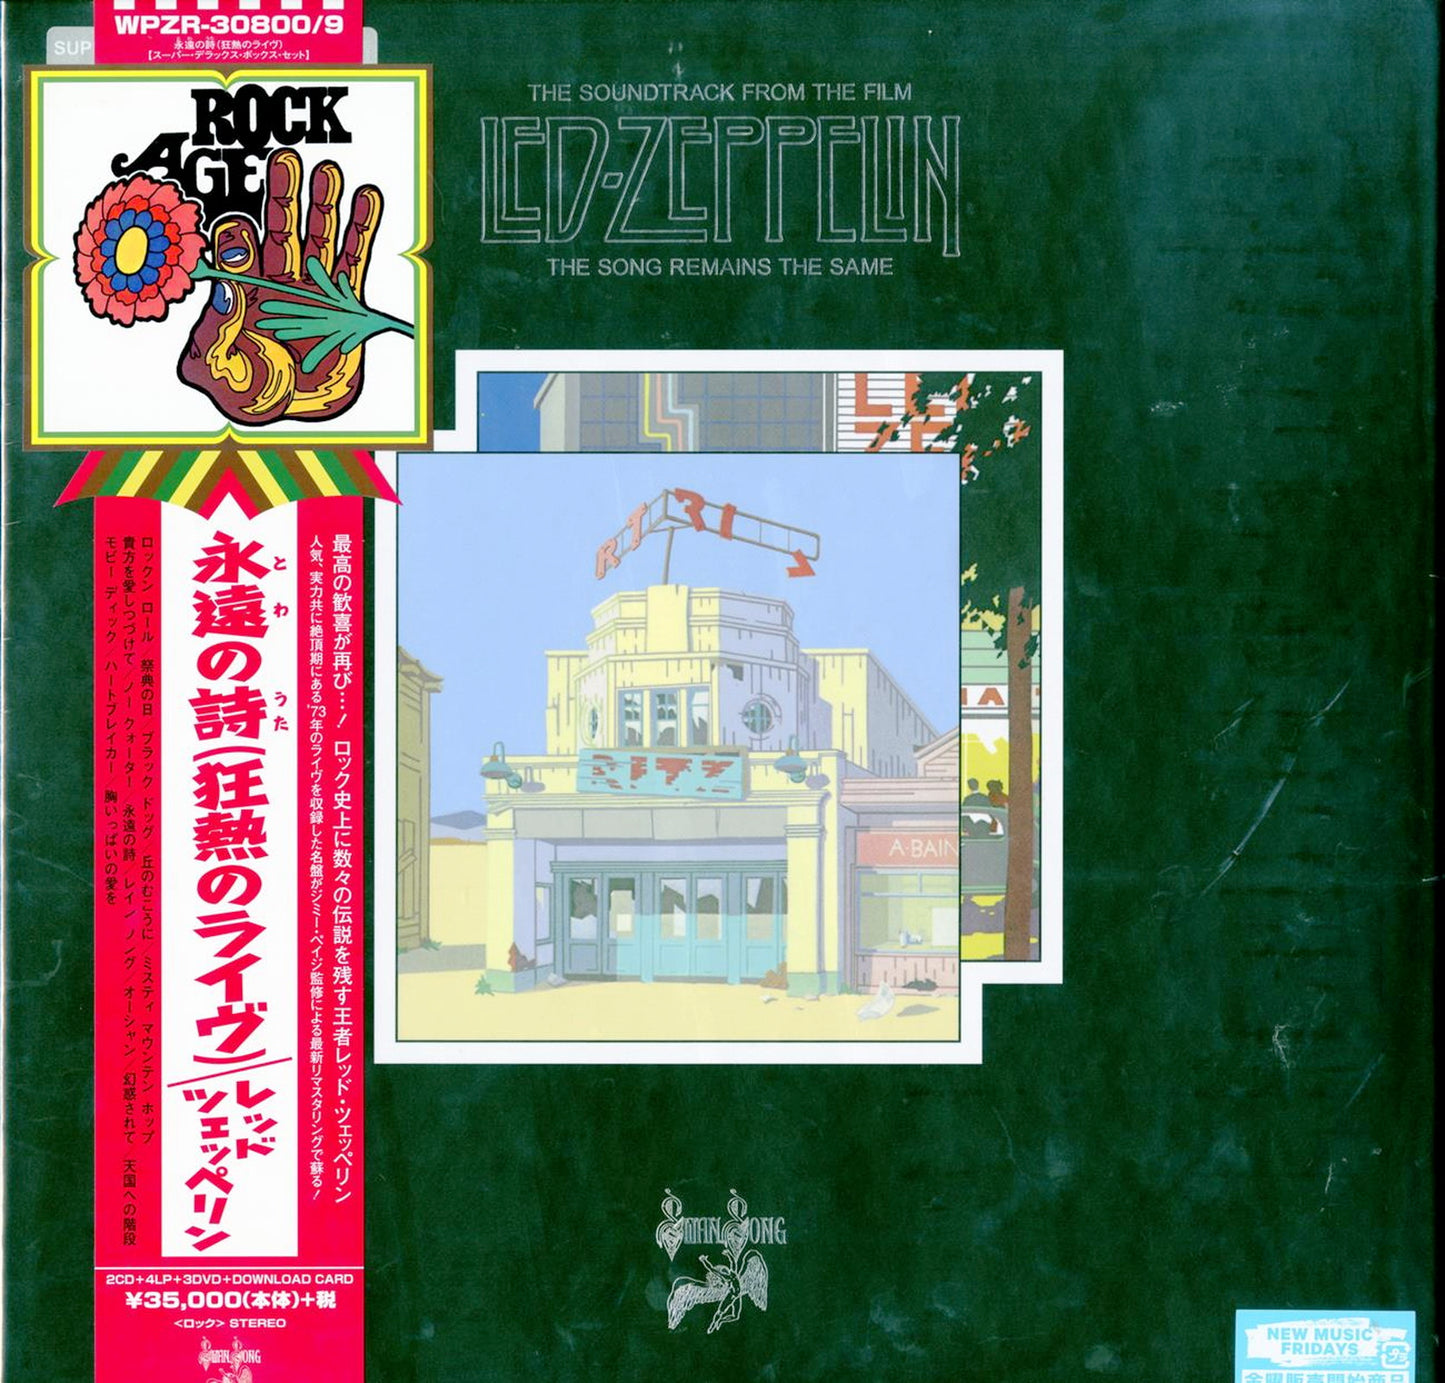 Led Zeppelin - Song Remains The Same - Japan  2 CD+3 DVD+4 LP Limited Edition